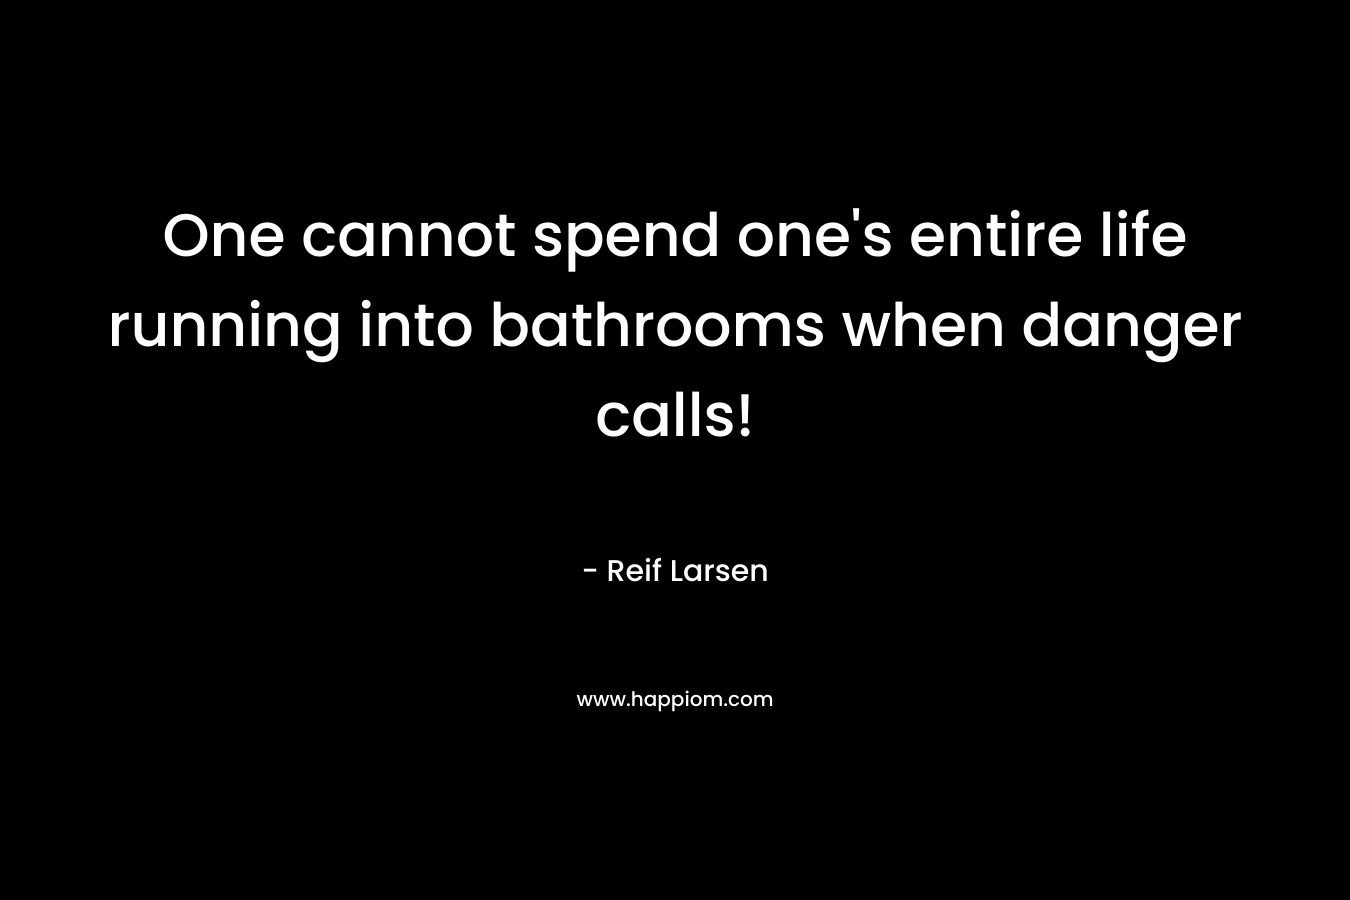 One cannot spend one's entire life running into bathrooms when danger calls!